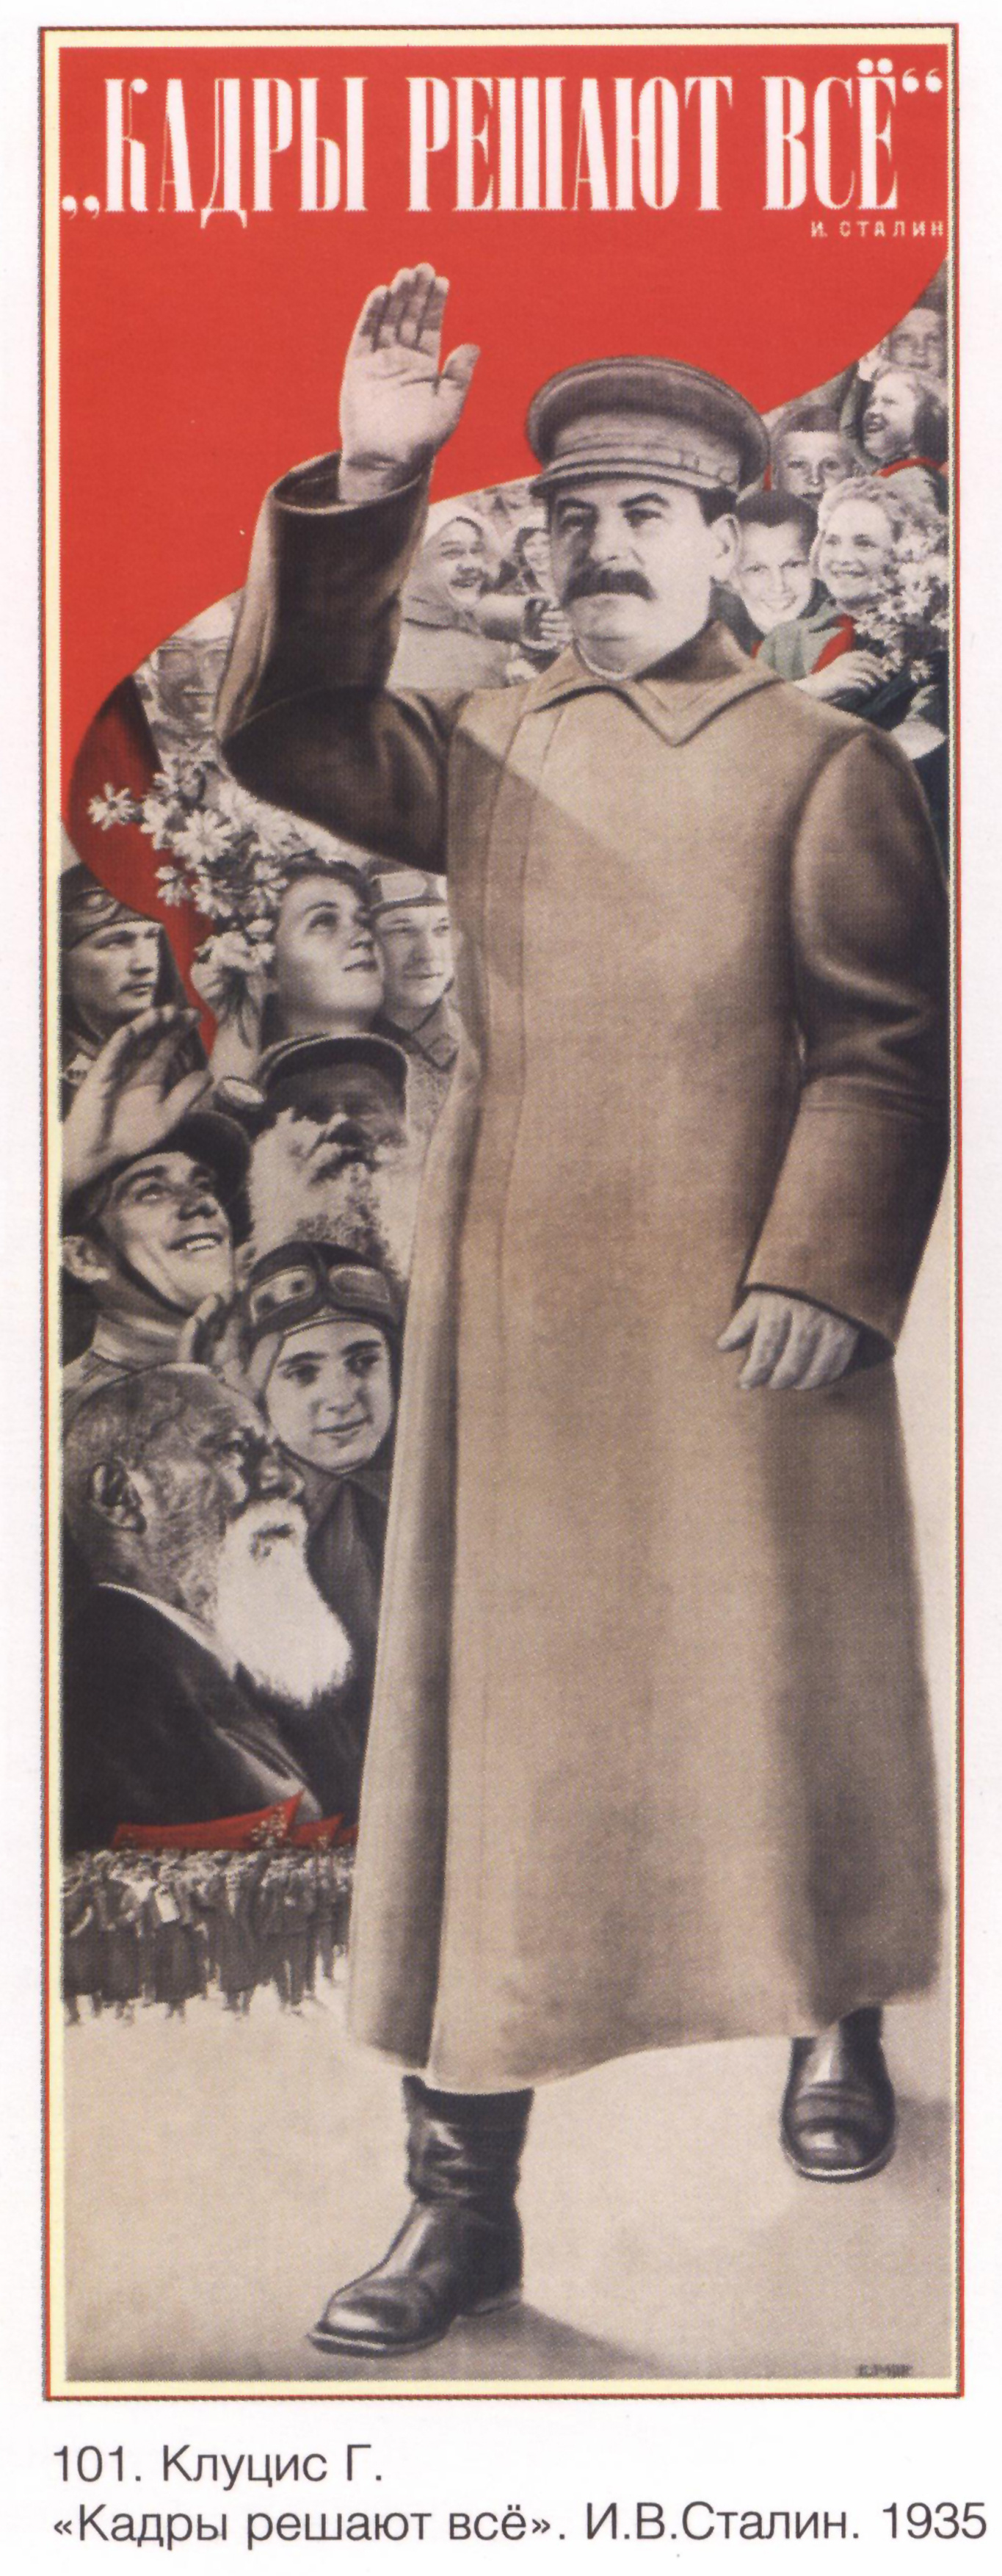 Posters USSR. Cadres decide everything